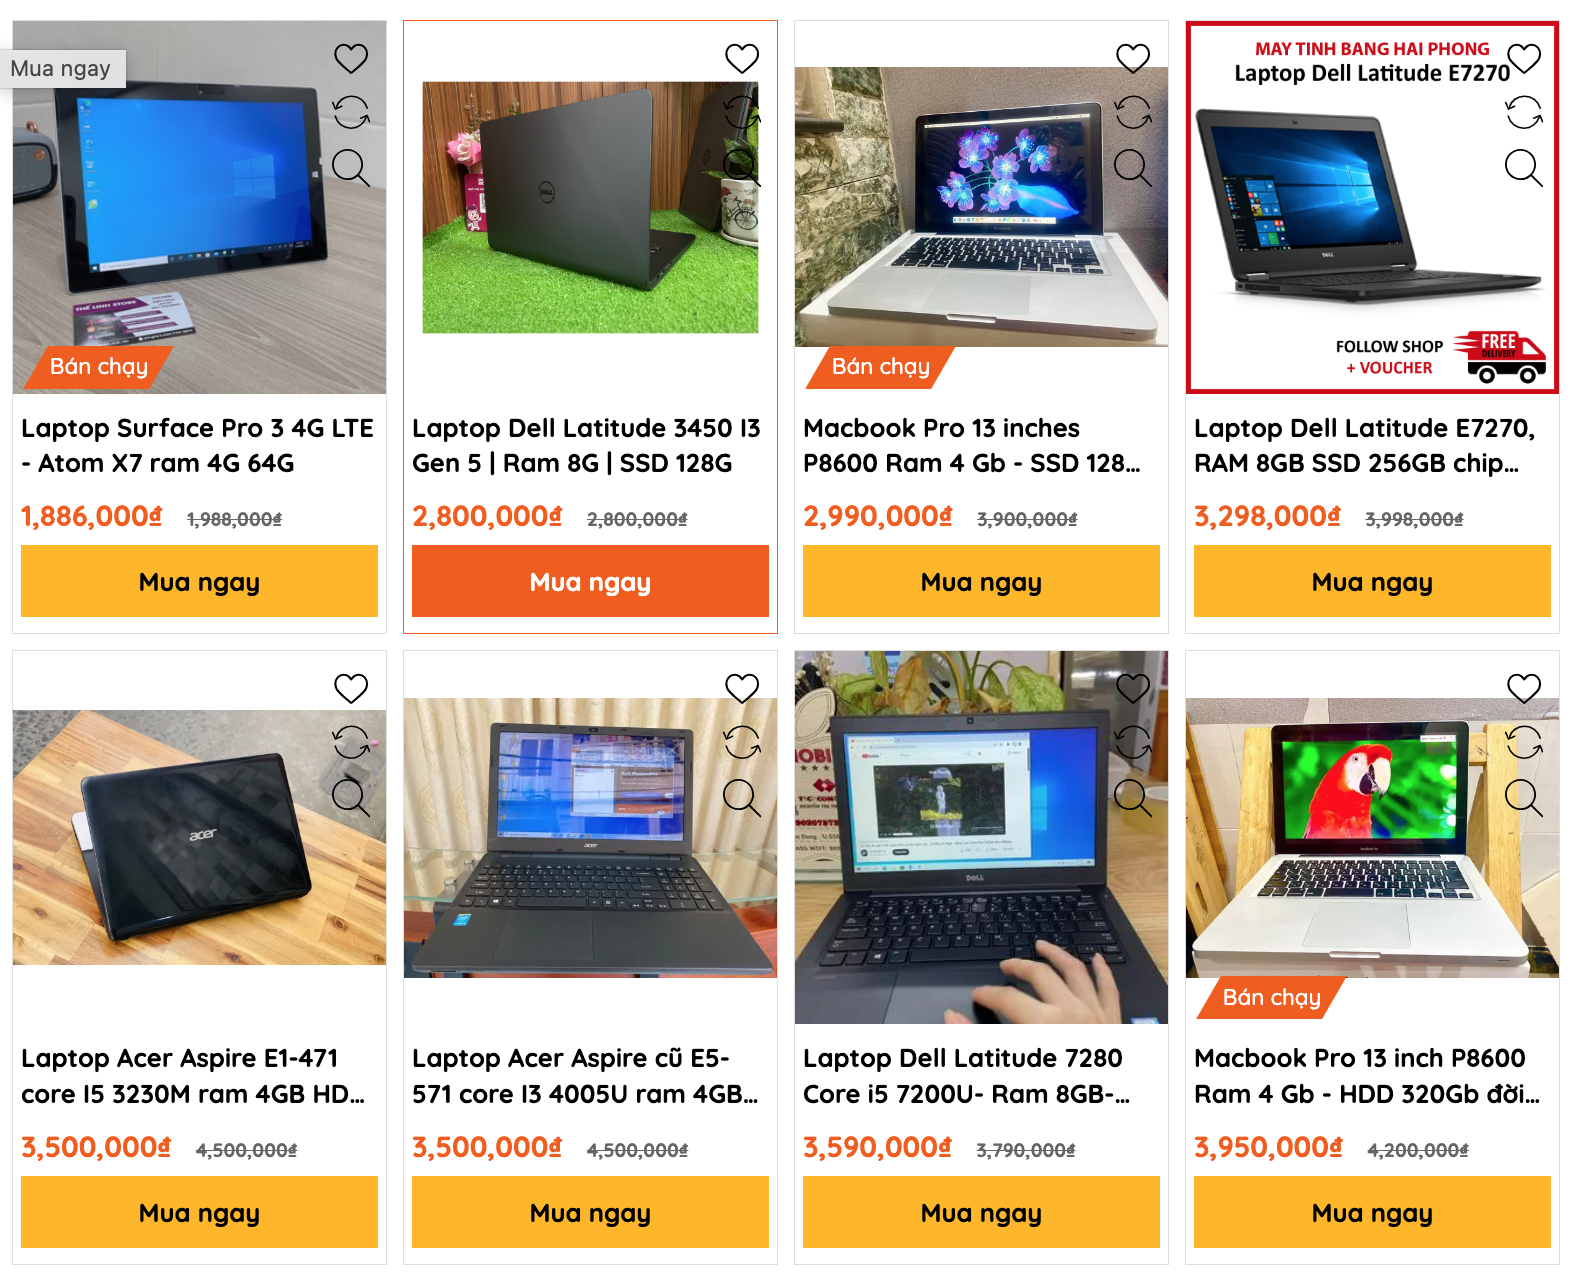 Laptop secondhand giá rẻ